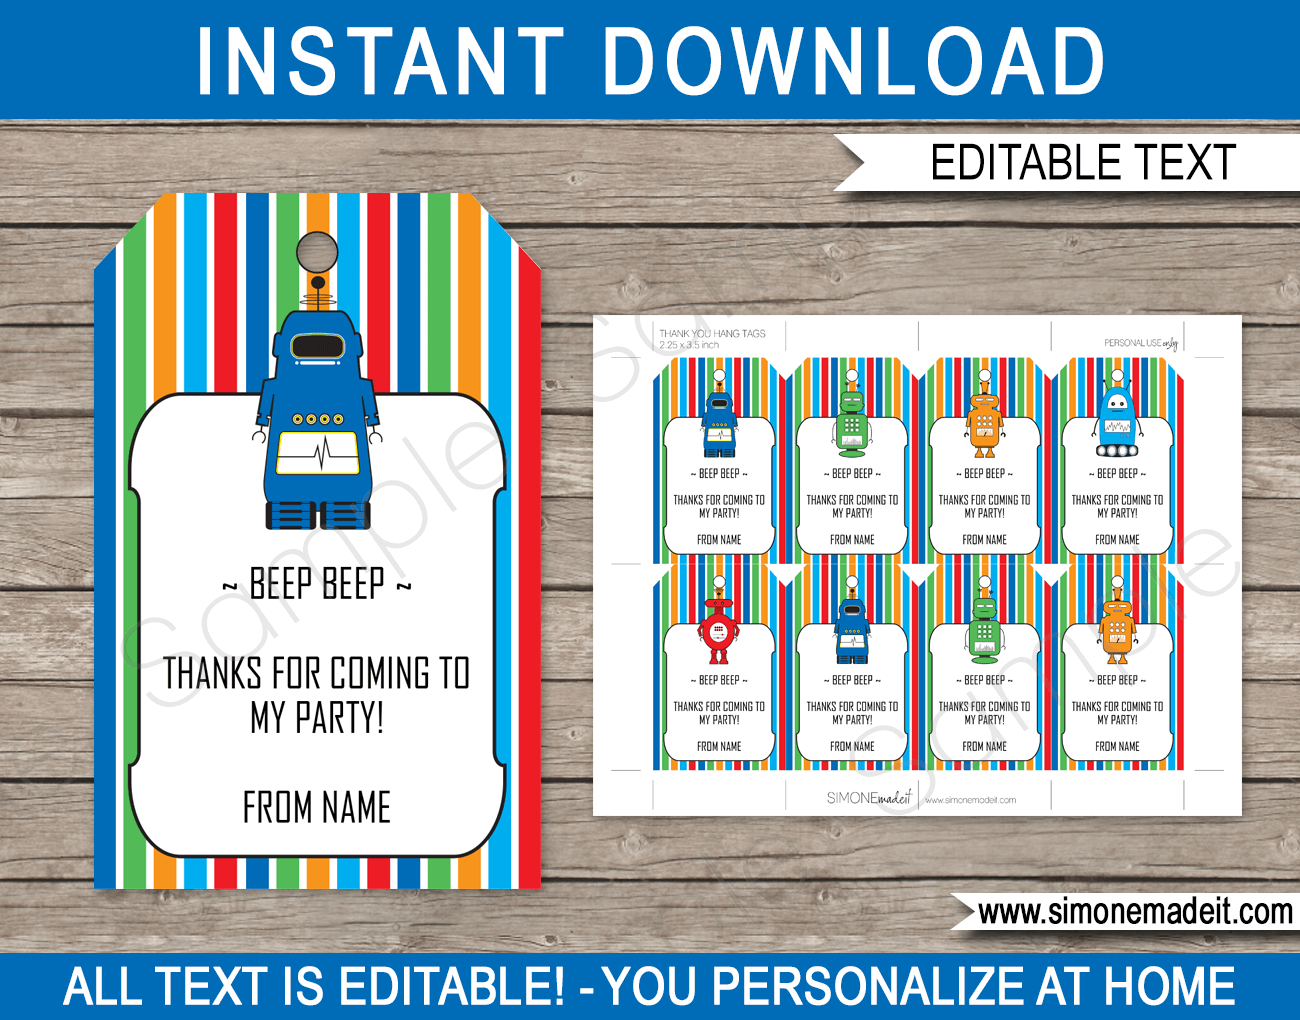 Robot Party Favor Tags | Thank You Tags | Birthday Party | Editable DIY Template | $3.00 INSTANT DOWNLOAD via SIMONEmadeit.com